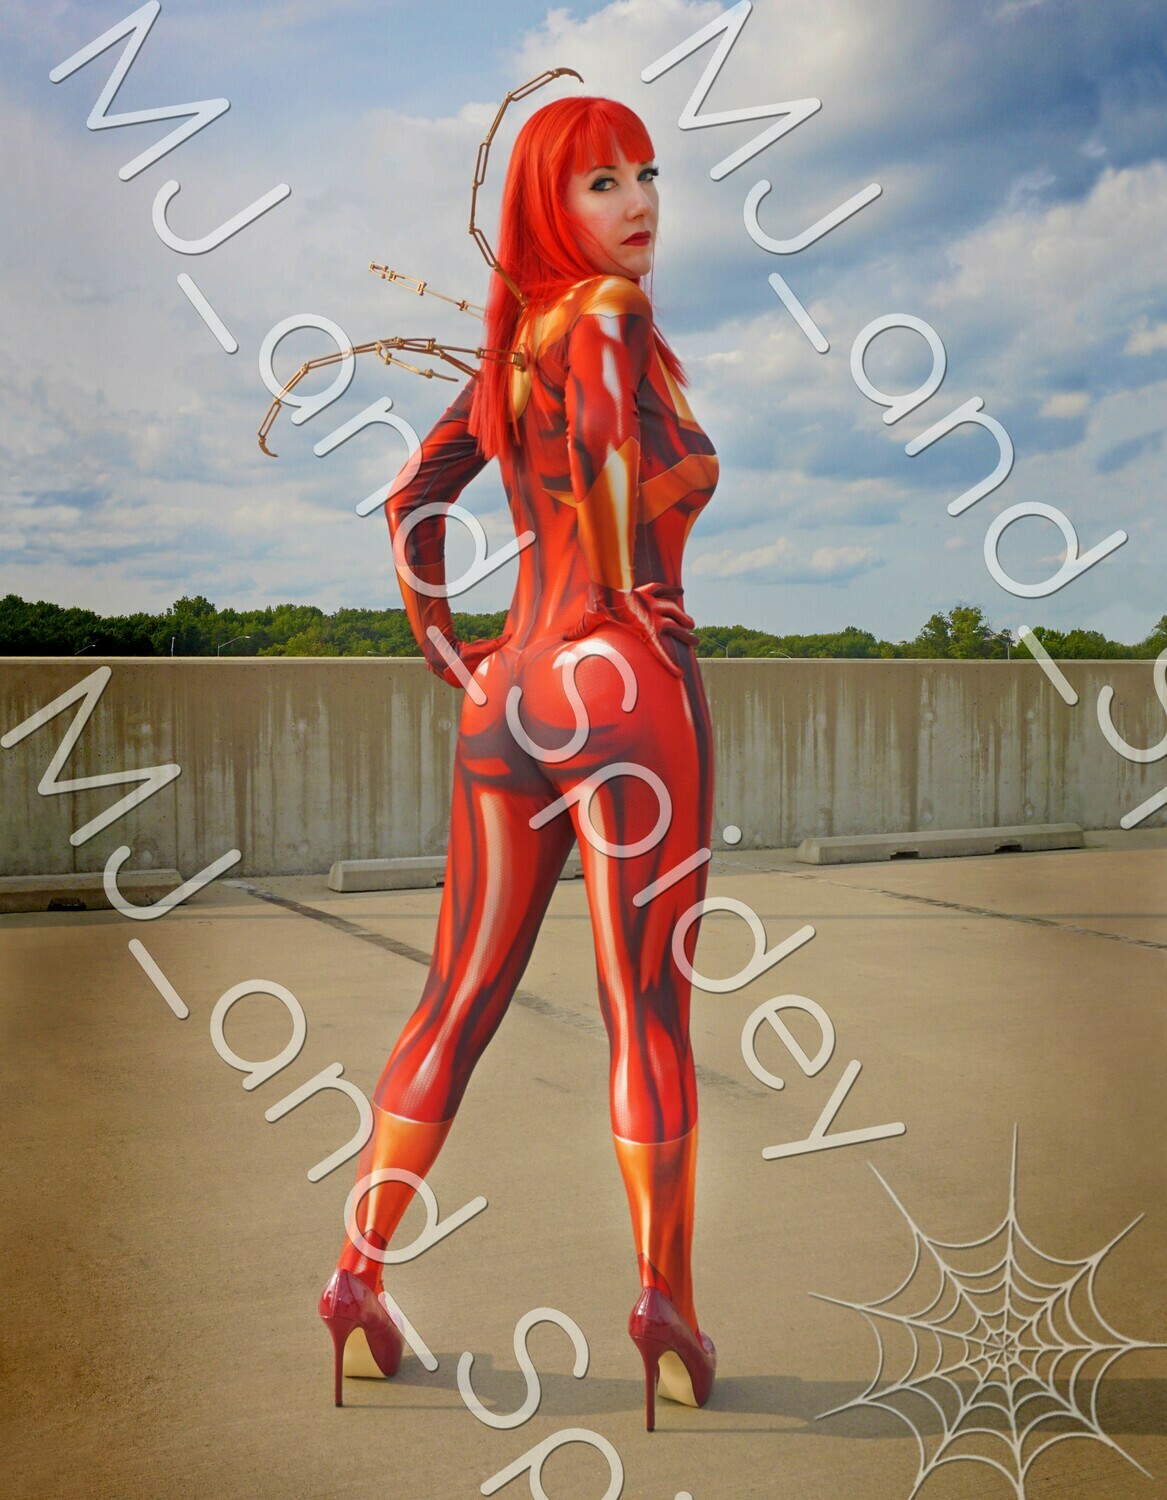 Marvel - Spider-Man - Mary Jane Watson - Iron Spider No. 5 - Digital Cosplay Image (@MJ_and_Spidey, MJ and Spidey, Comics)